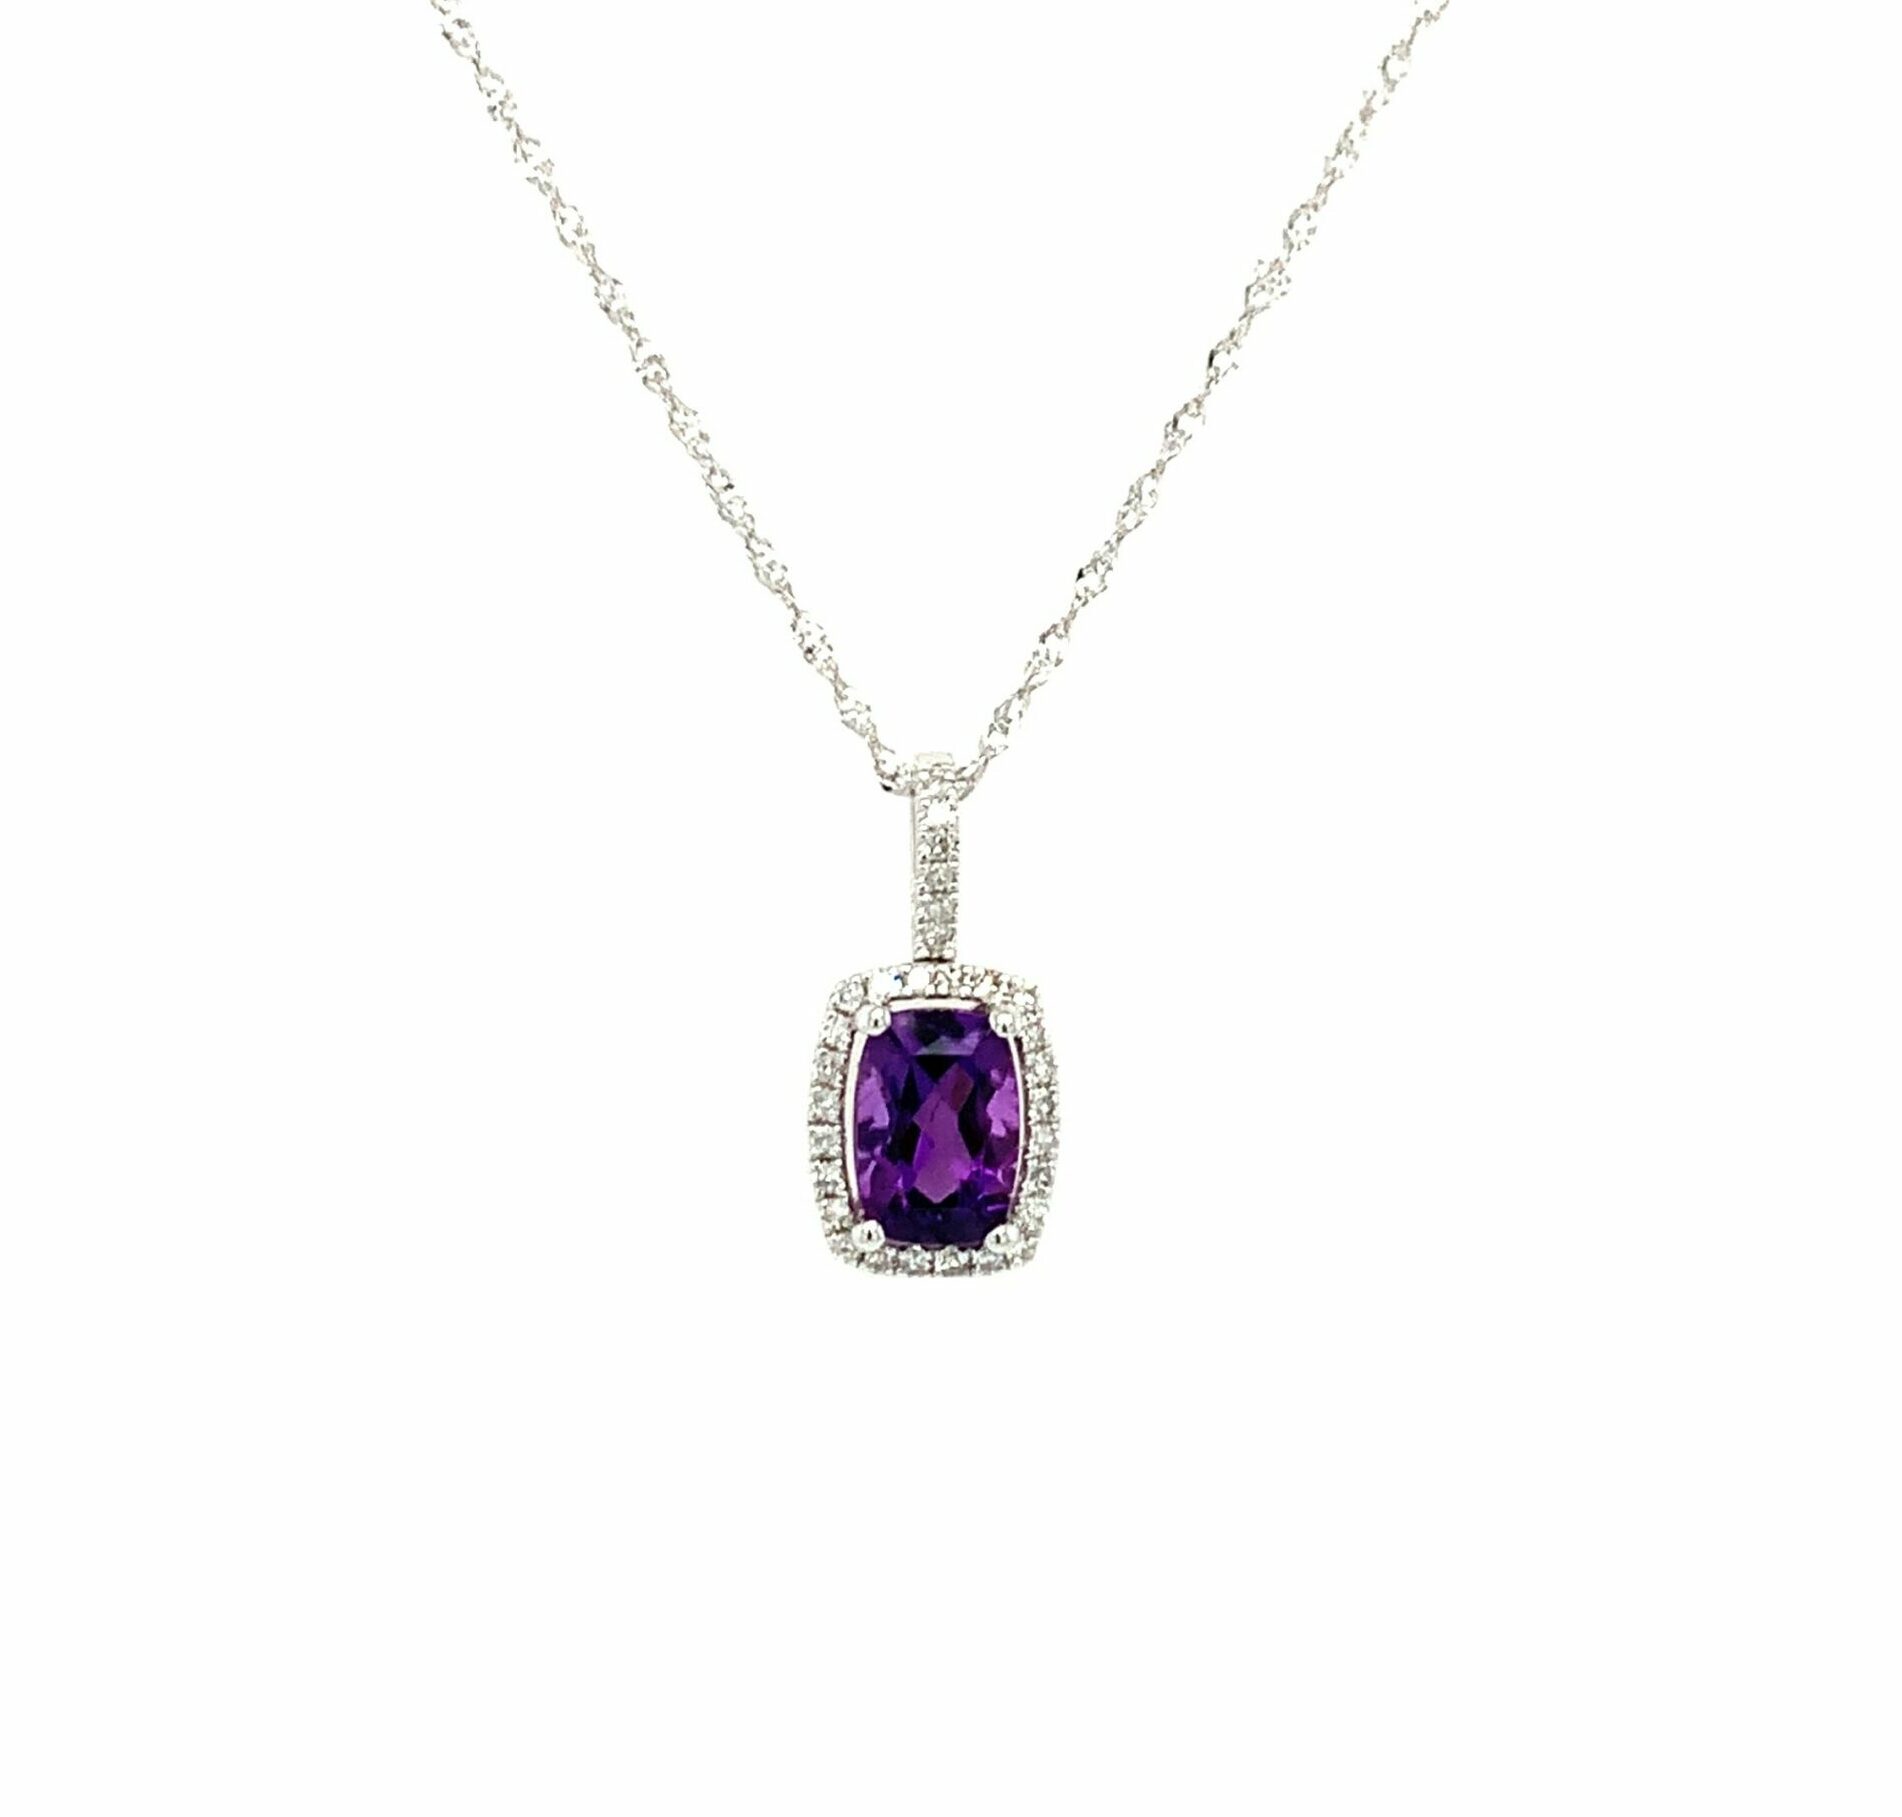 White Gold Amethyst and Diamond Pendant Necklace